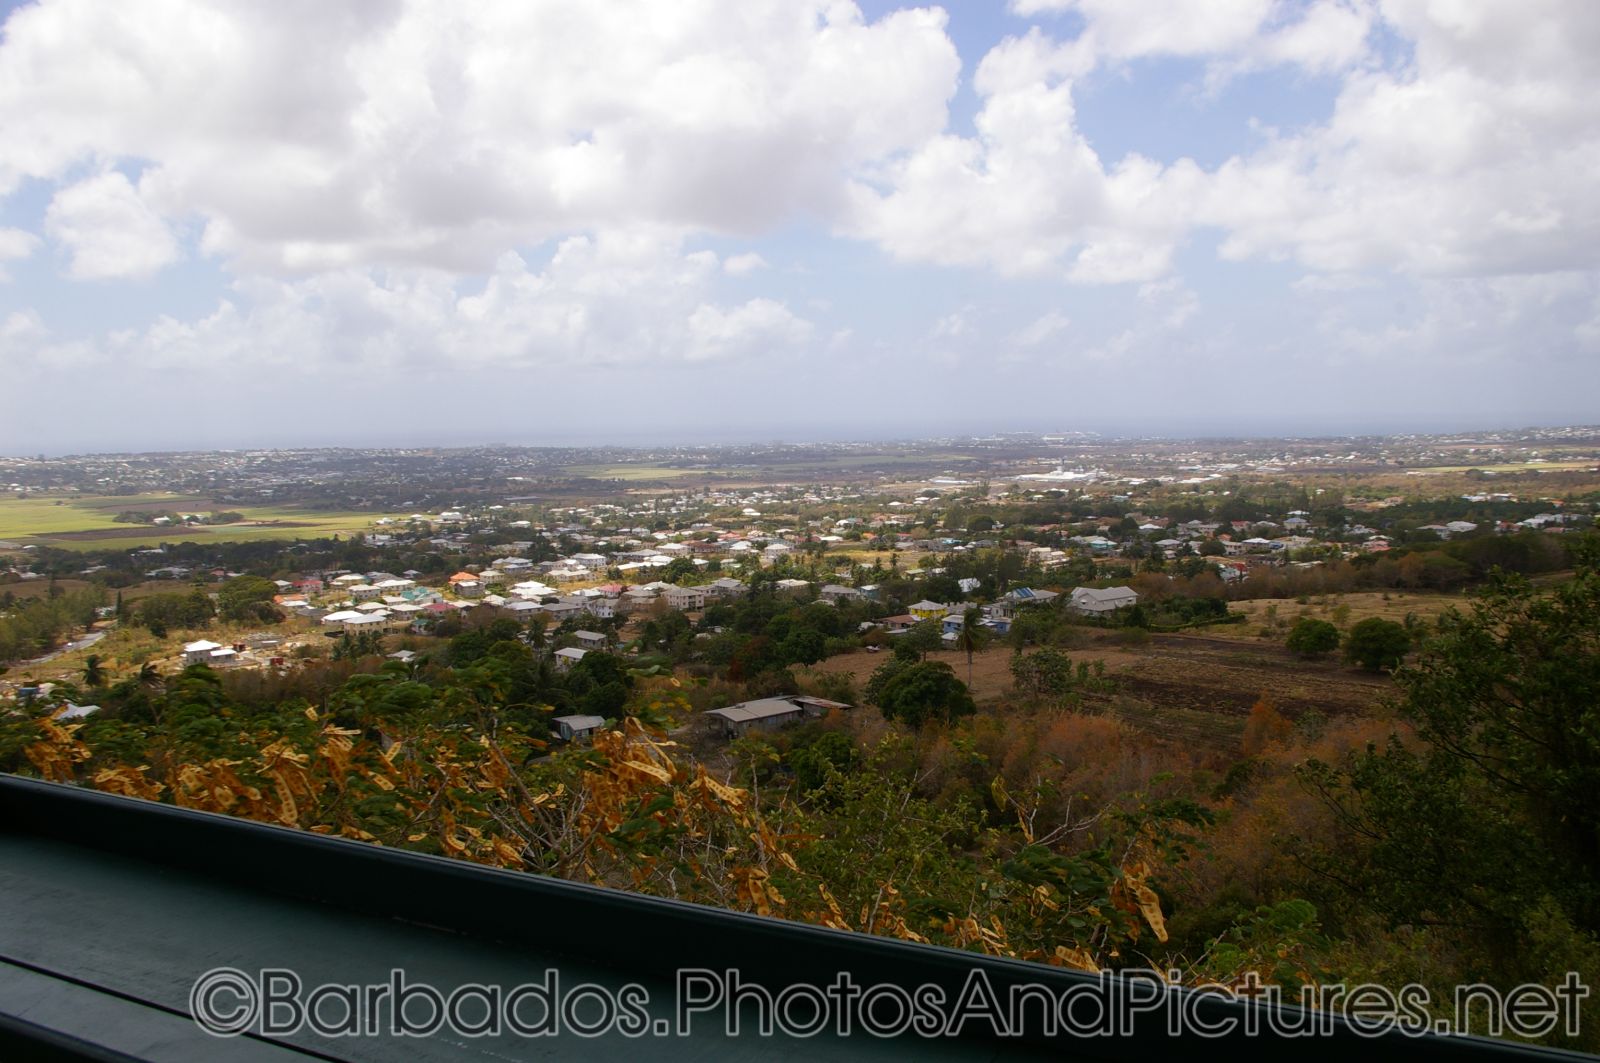 View of cruise ships in the distance from Gun Hill Signal Station in Barbados.jpg
